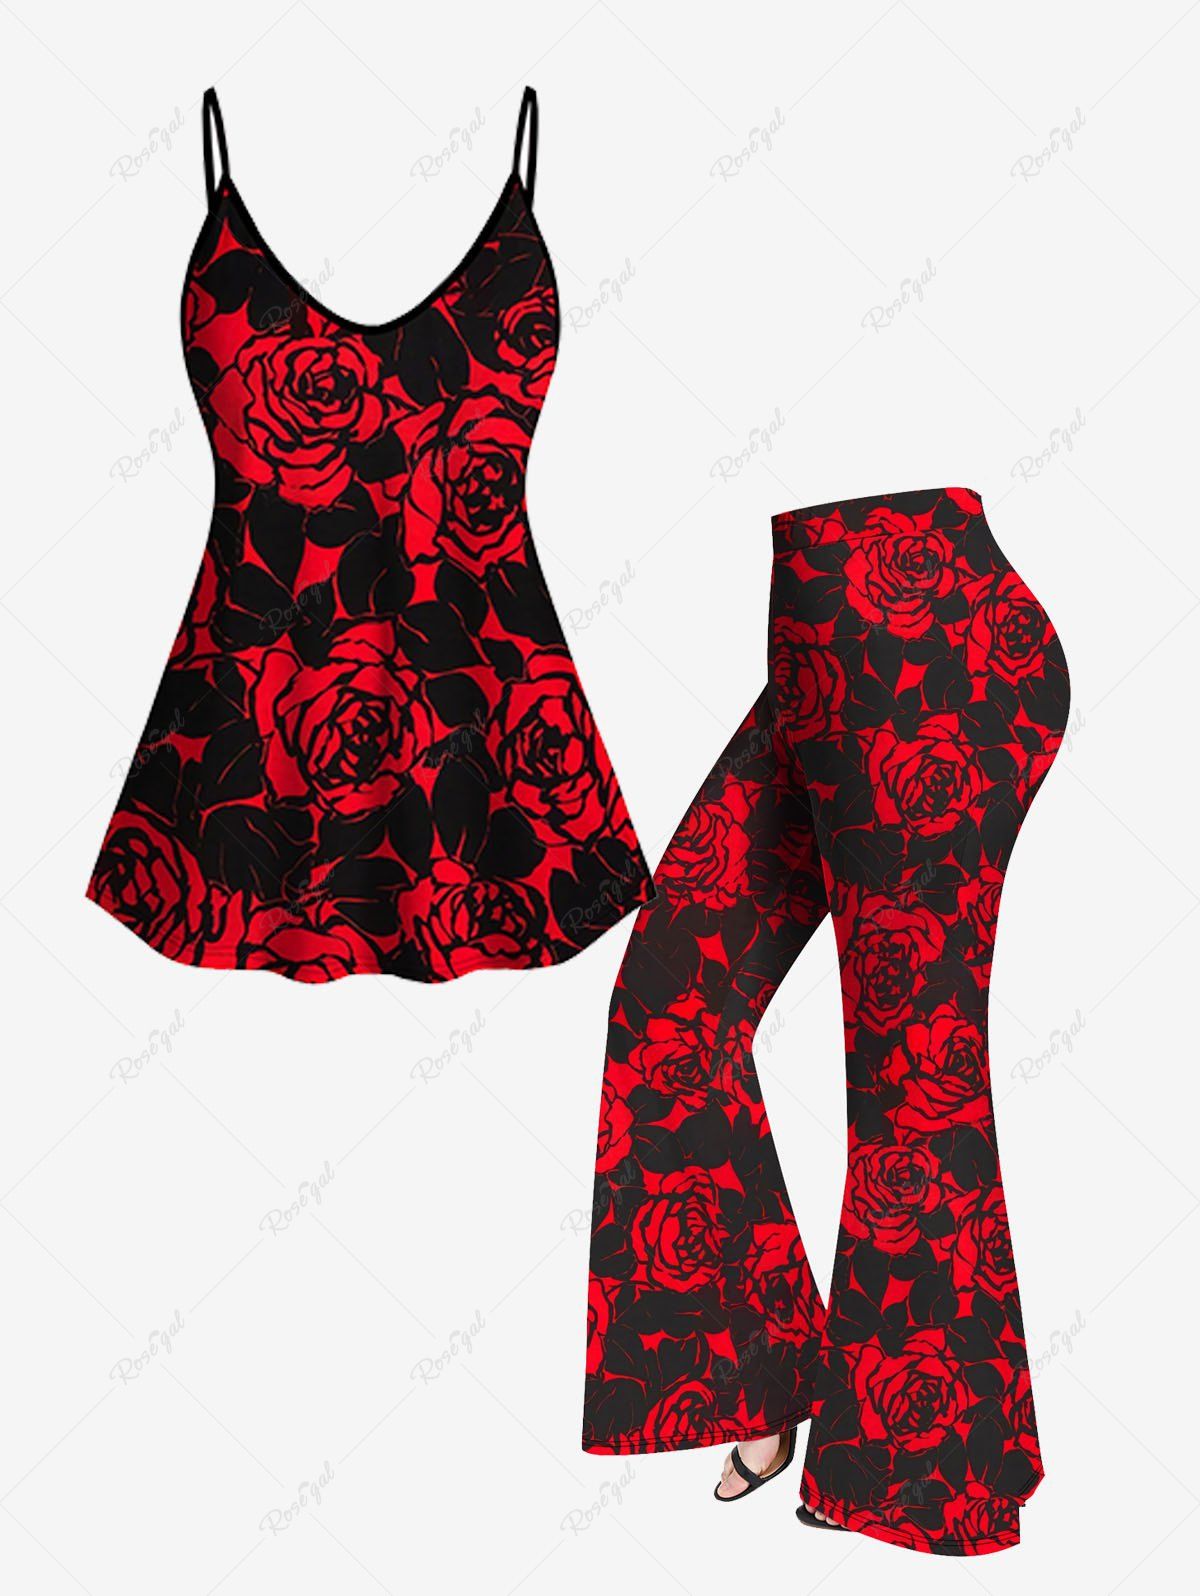 Store Rose Printed Cami Top (Adjustable Shoulder Strap) and Flare Pants Plus Size 70s 80s Outfit  